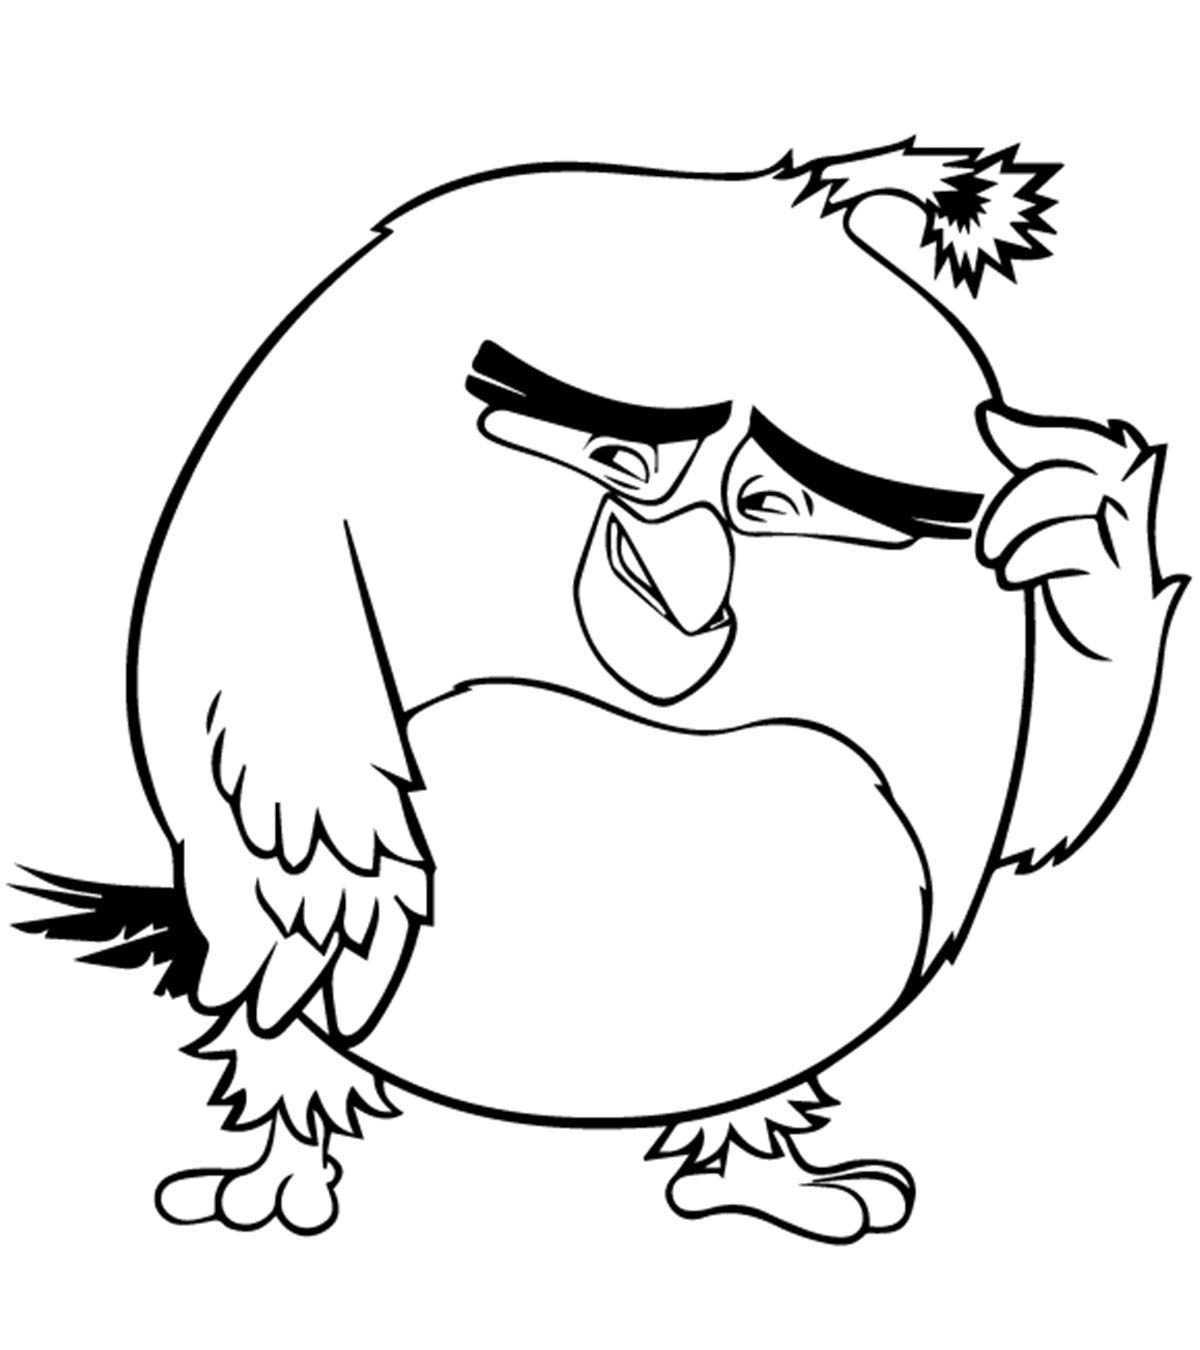 Download Top 40 Free Printable Angry Birds Coloring Pages Online